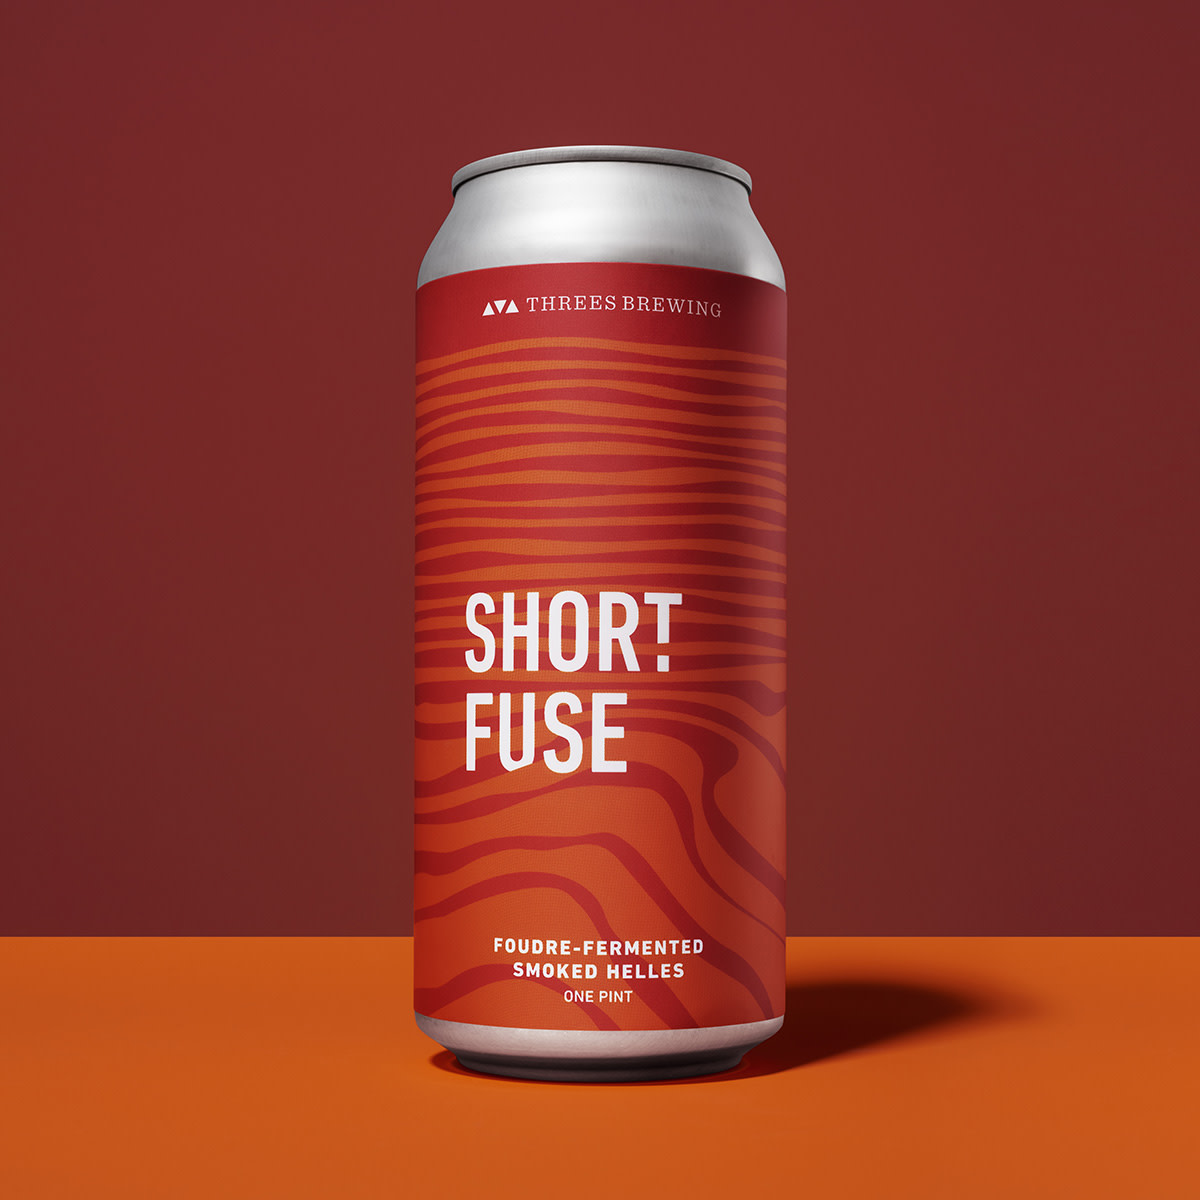 Short Fuse Foudre Fermented Smoked Helles